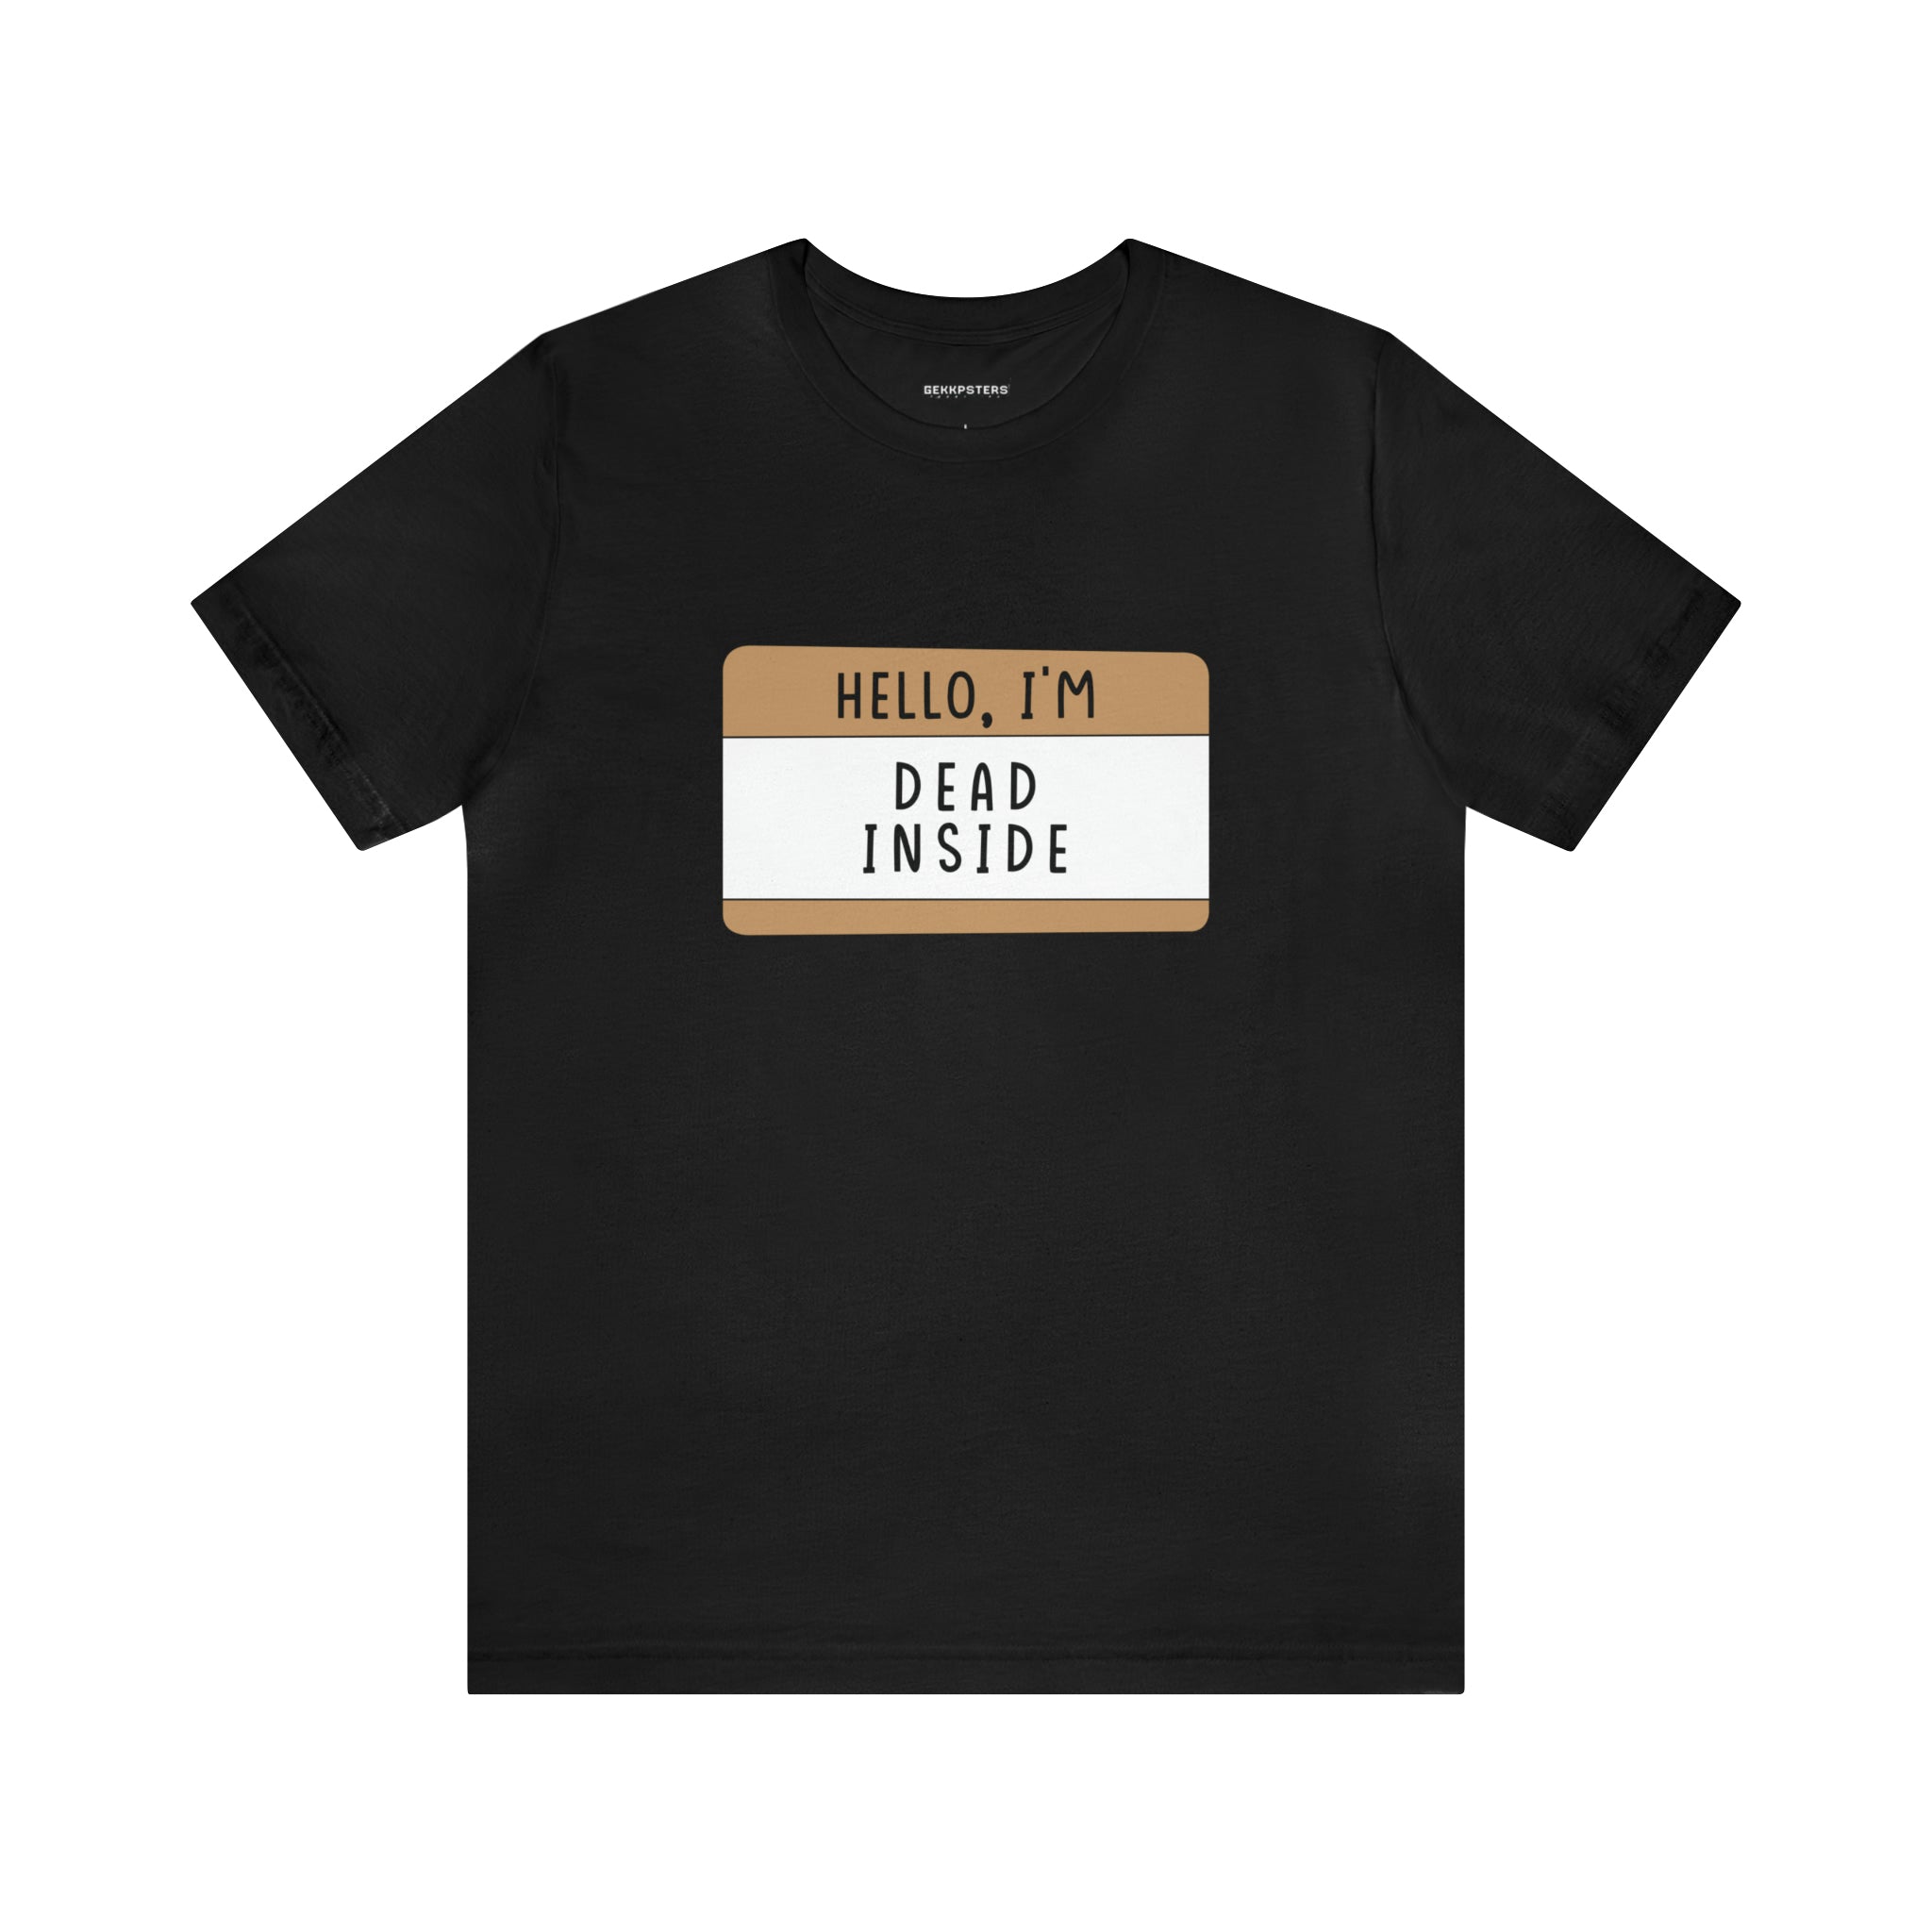 A black Hello, I'm Dead Inside T-Shirt with a quirky design name tag graphic that reads "HELLO, I'M DEAD INSIDE" in capital letters.